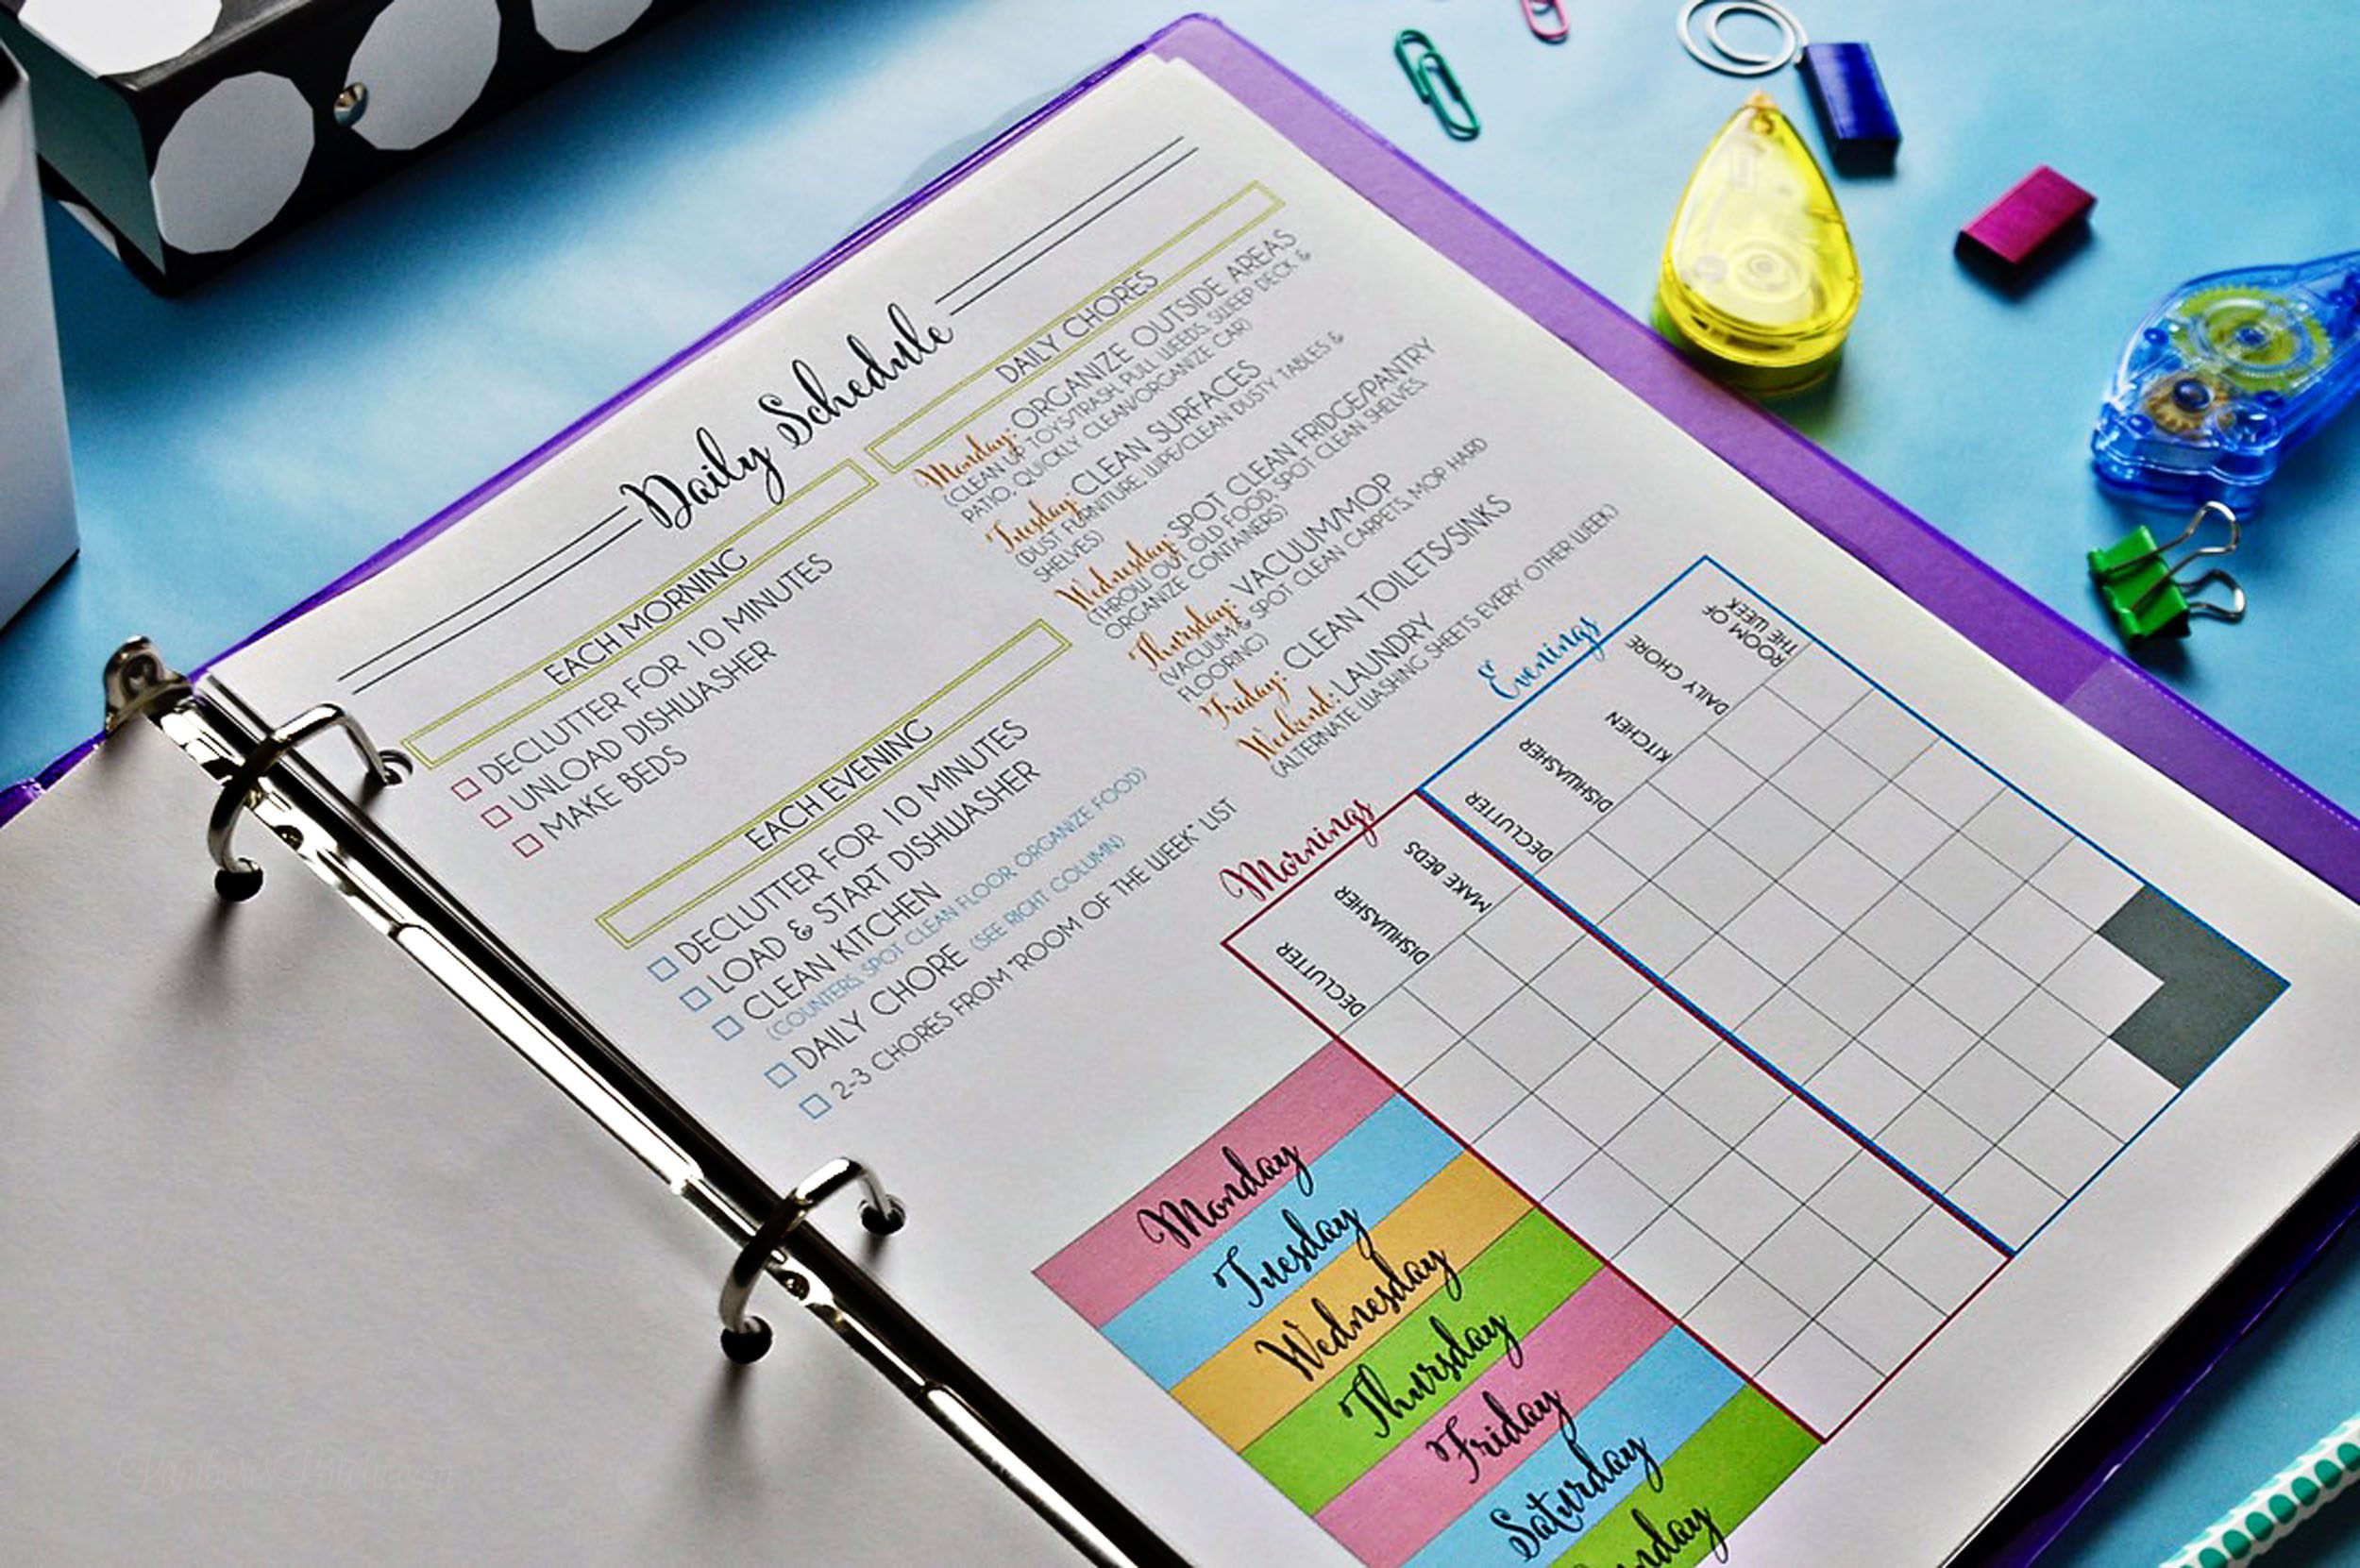 Daily cleaning schedule in a notebook on a desk